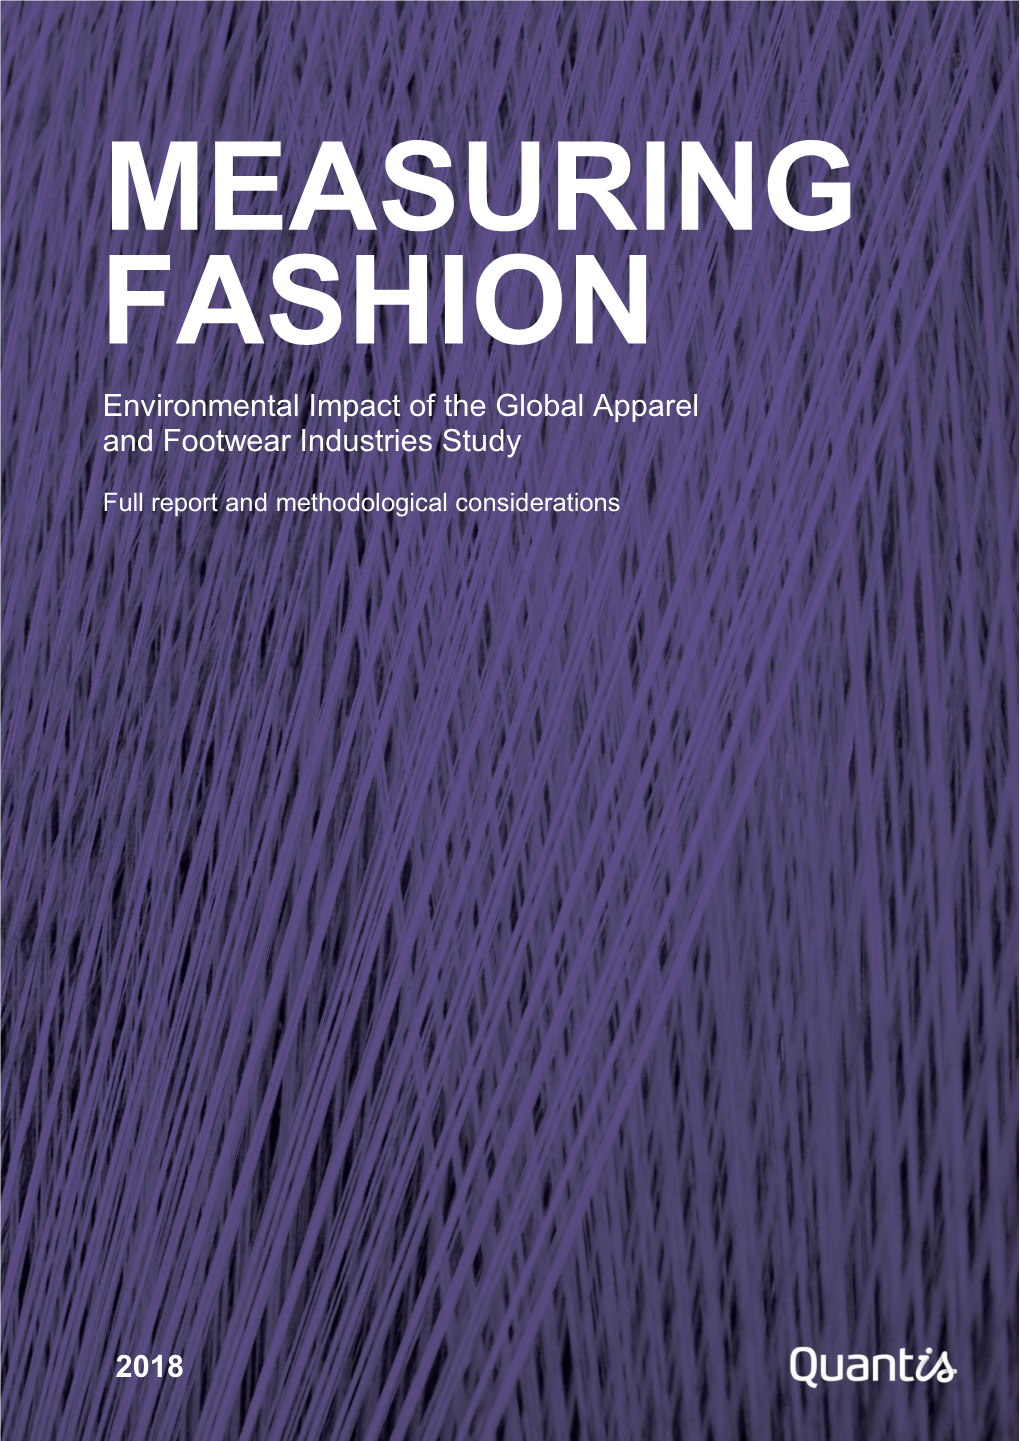 2018 Environmental Impact of the Global Apparel and Footwear Industries Study